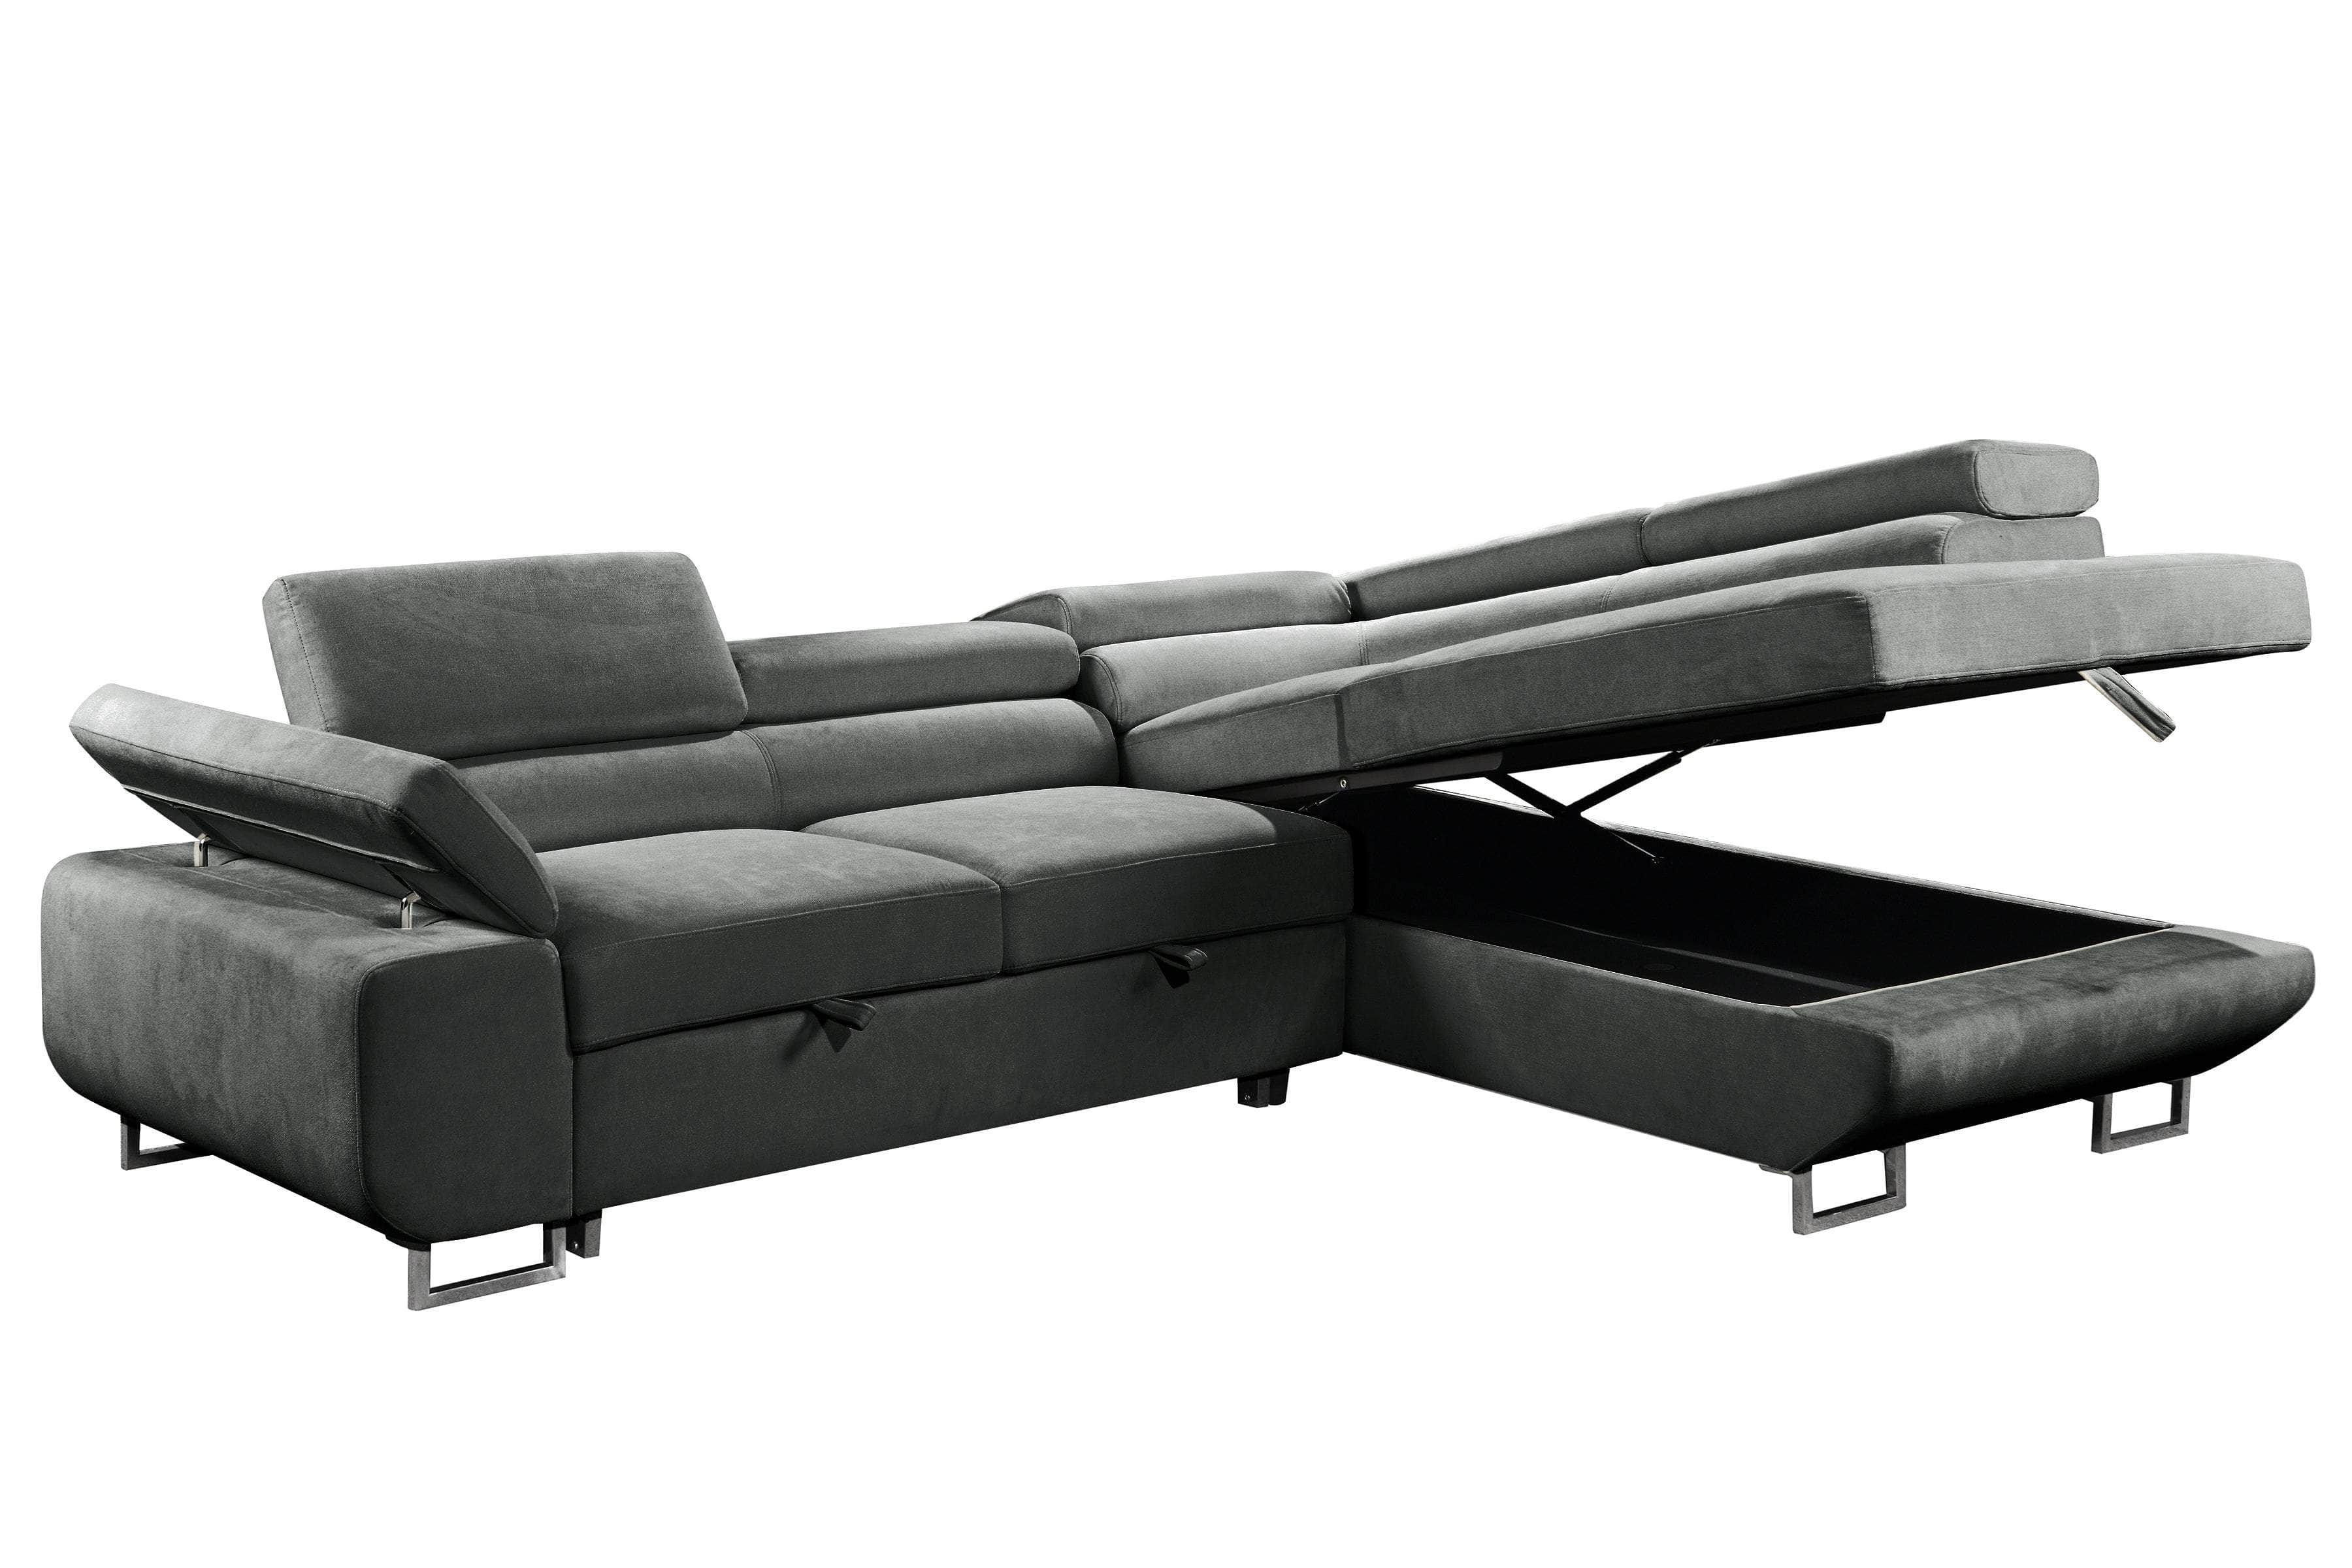 Urban Cali Sectional Sofa Ash / Right Facing Chaise Hollywood Sleeper Sectional Sofa Bed with Adjustable Headrests and Storage Chaise - Available in 2 Colours